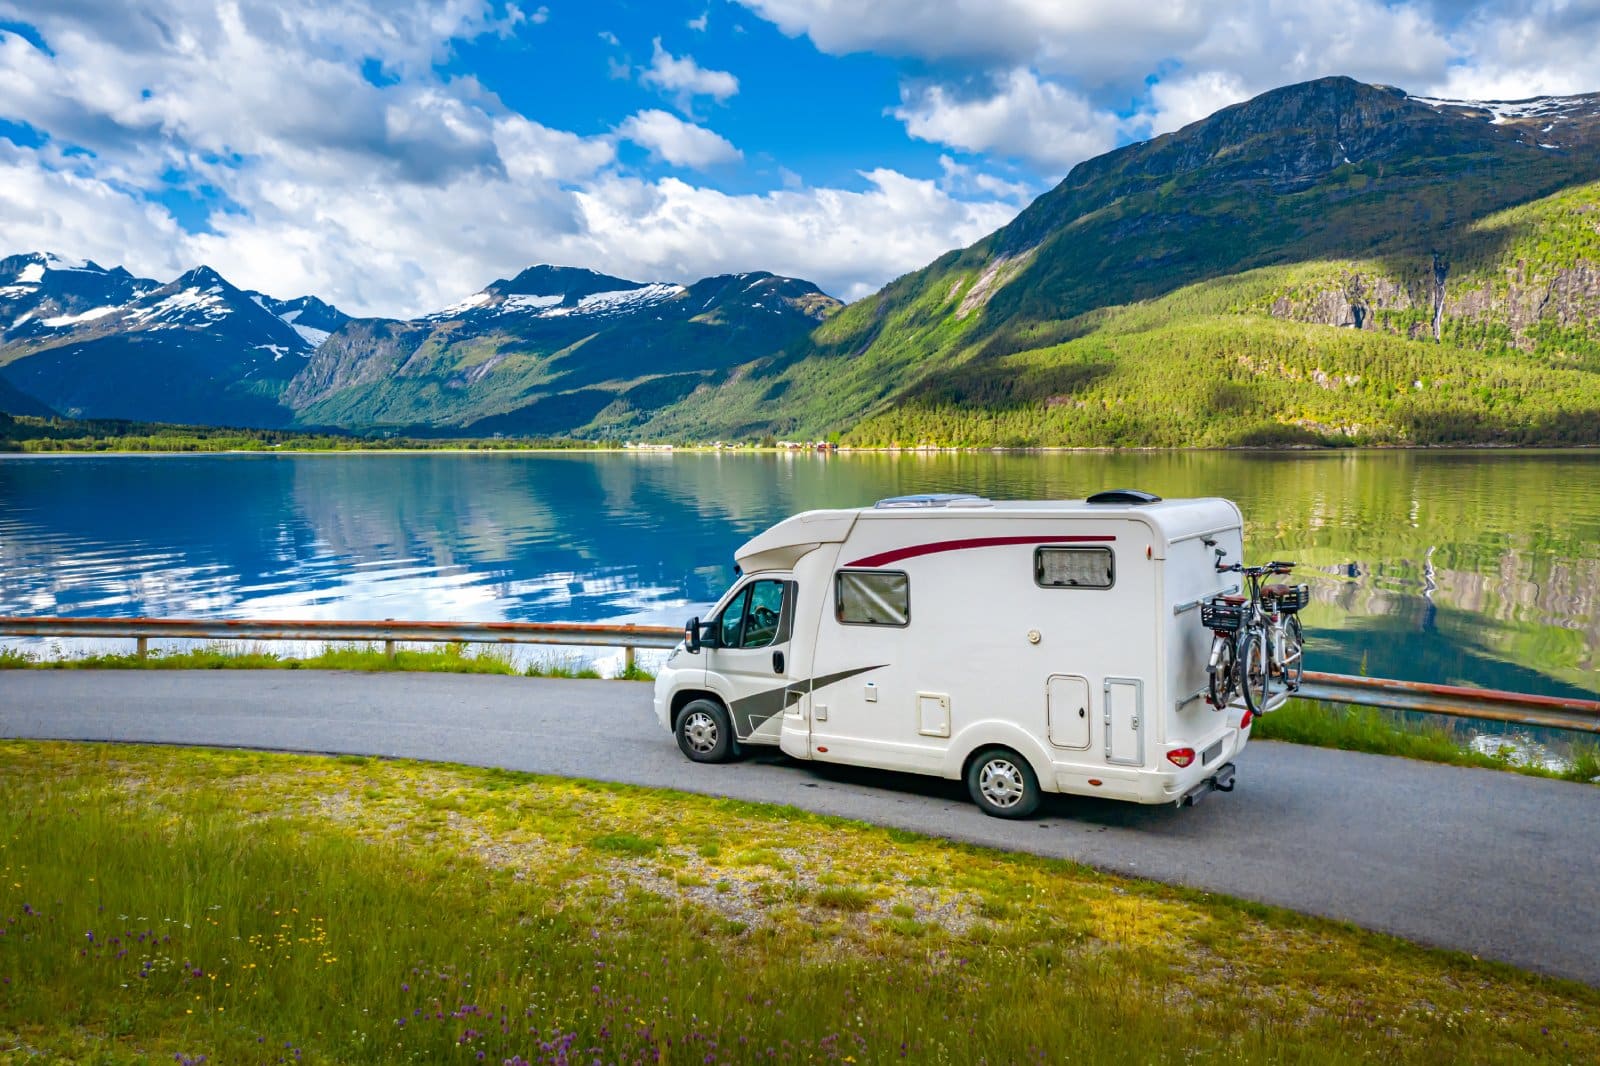 <p class="wp-caption-text">Image Credit: Shutterstock / Andrei Armiagov</p>  <p><span>Nothing says “American vacation” quite like hitting the open road in a home-on-wheels, complete with all the amenities of home, plus the ability to cook a full meal while someone else drives.</span></p>